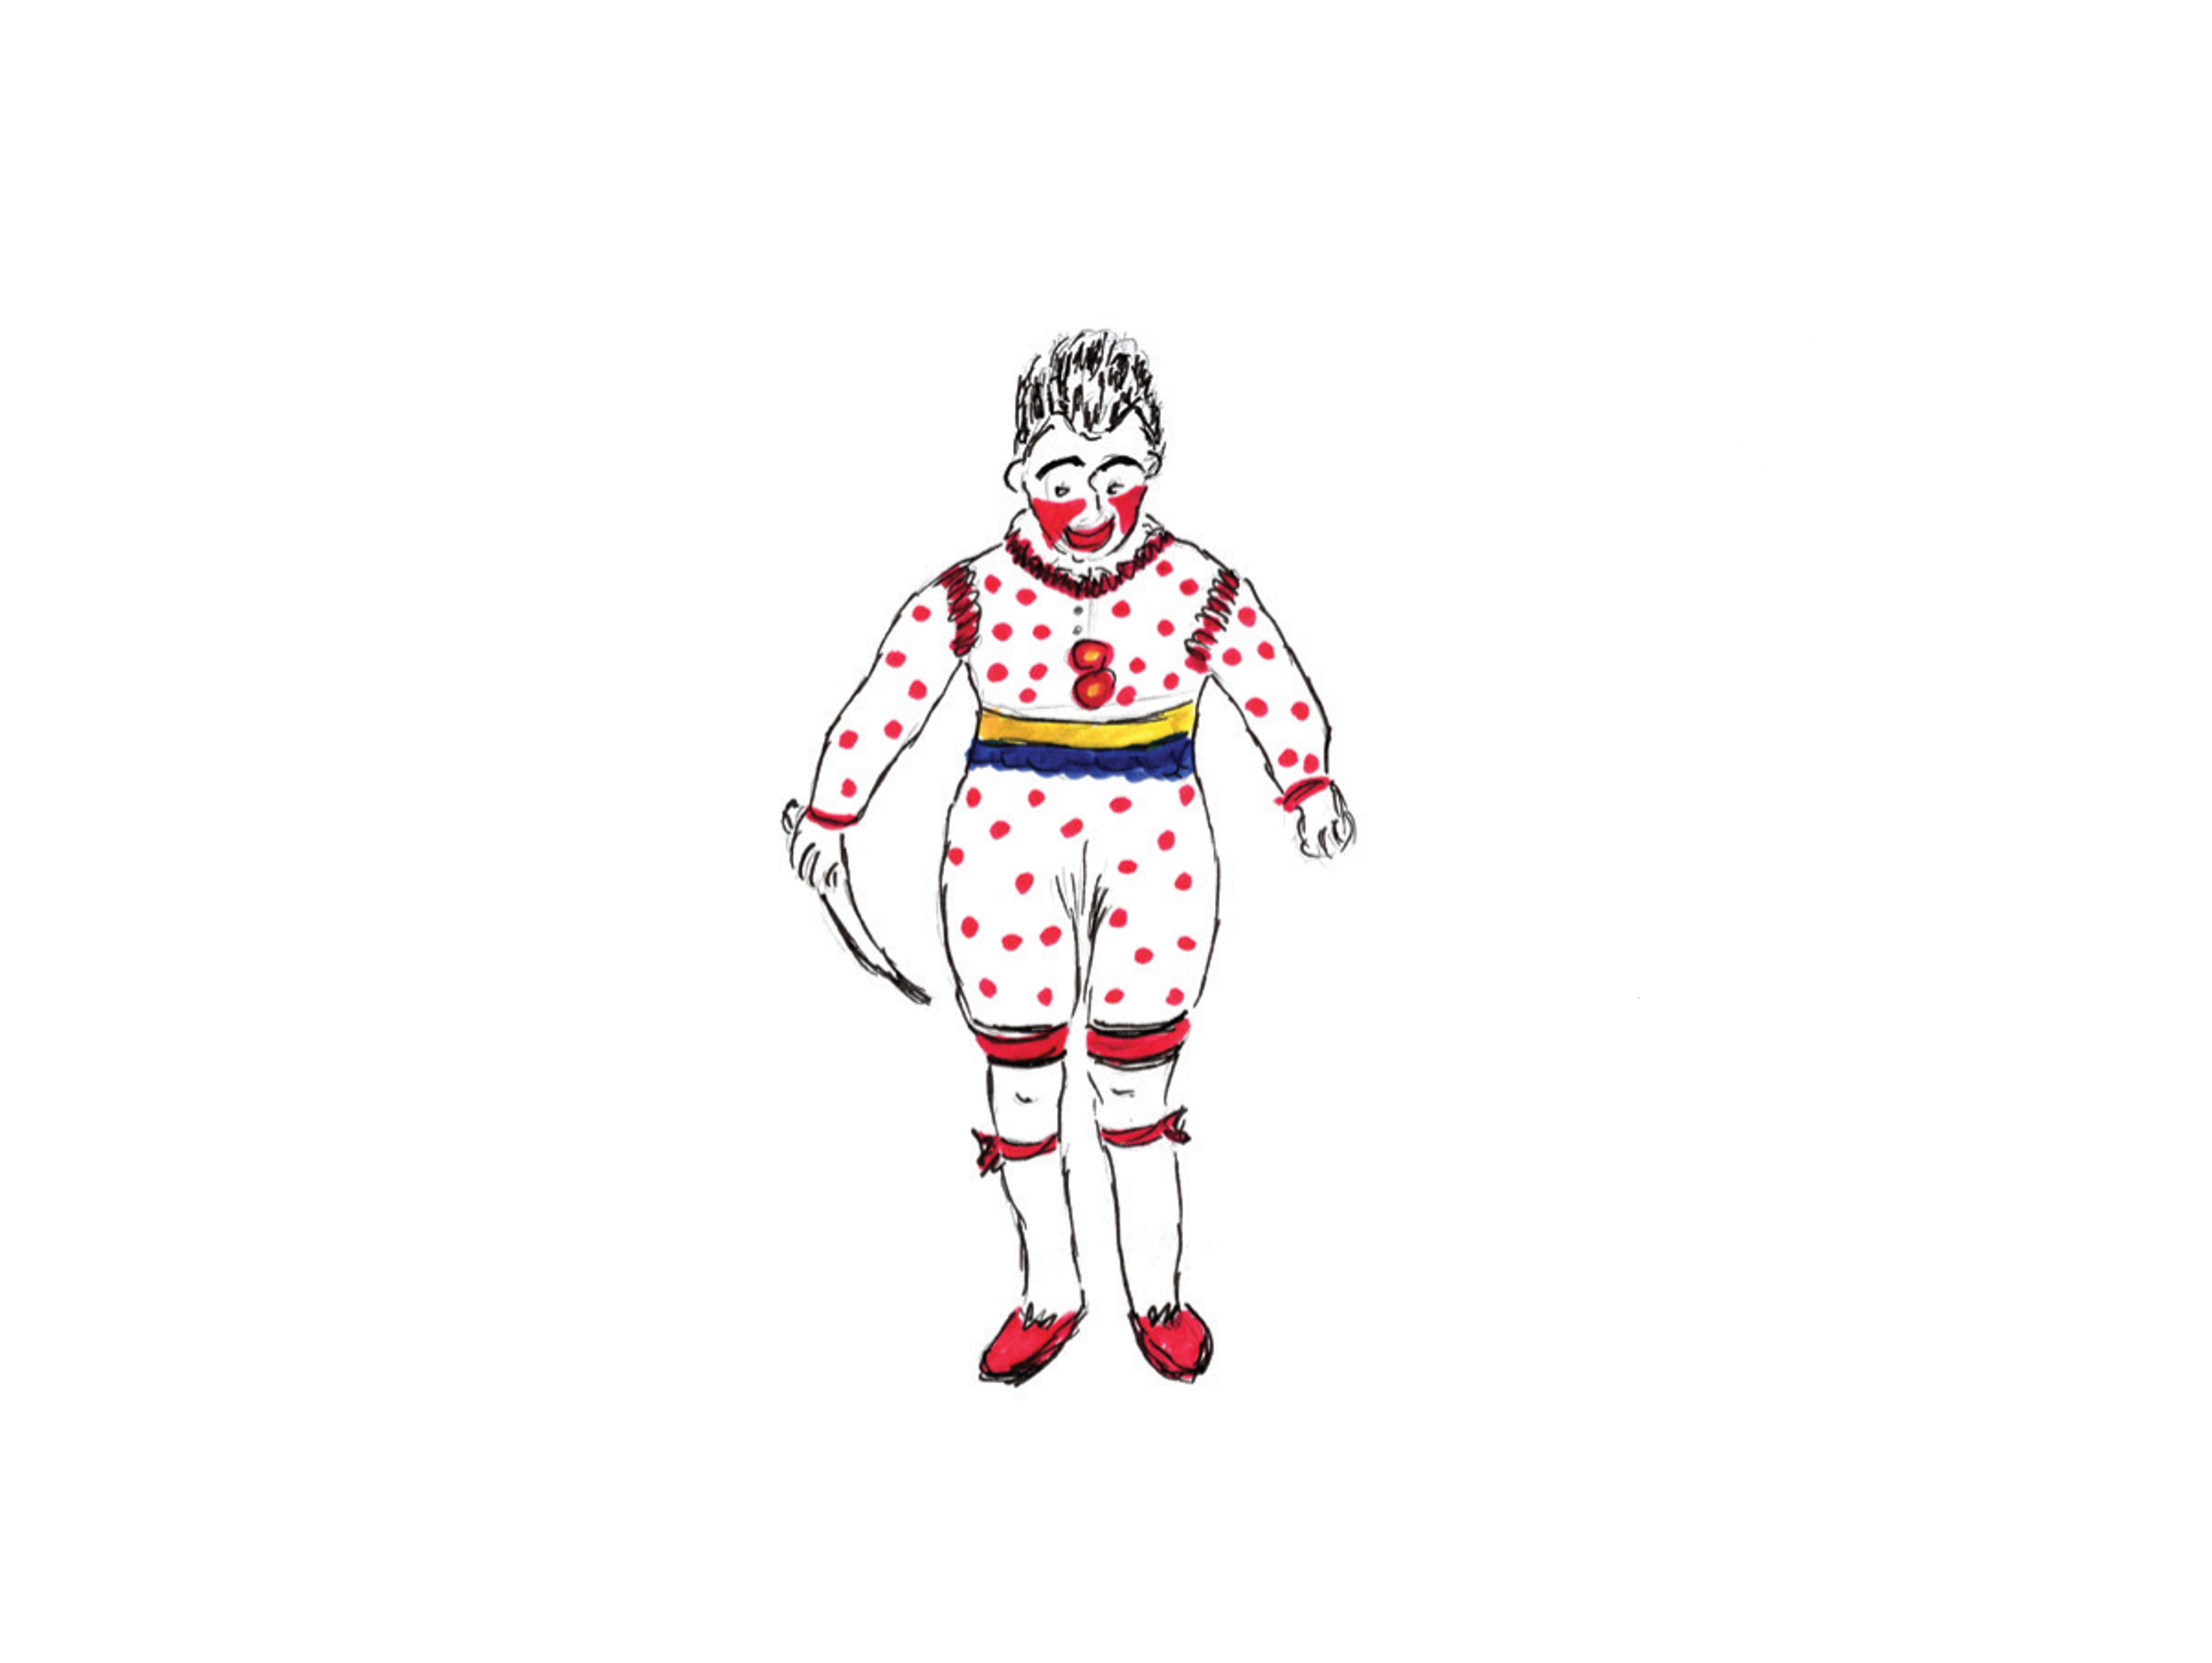 Illustration of a red-cheeked clown with a white costume with red polka dots, holding a sword